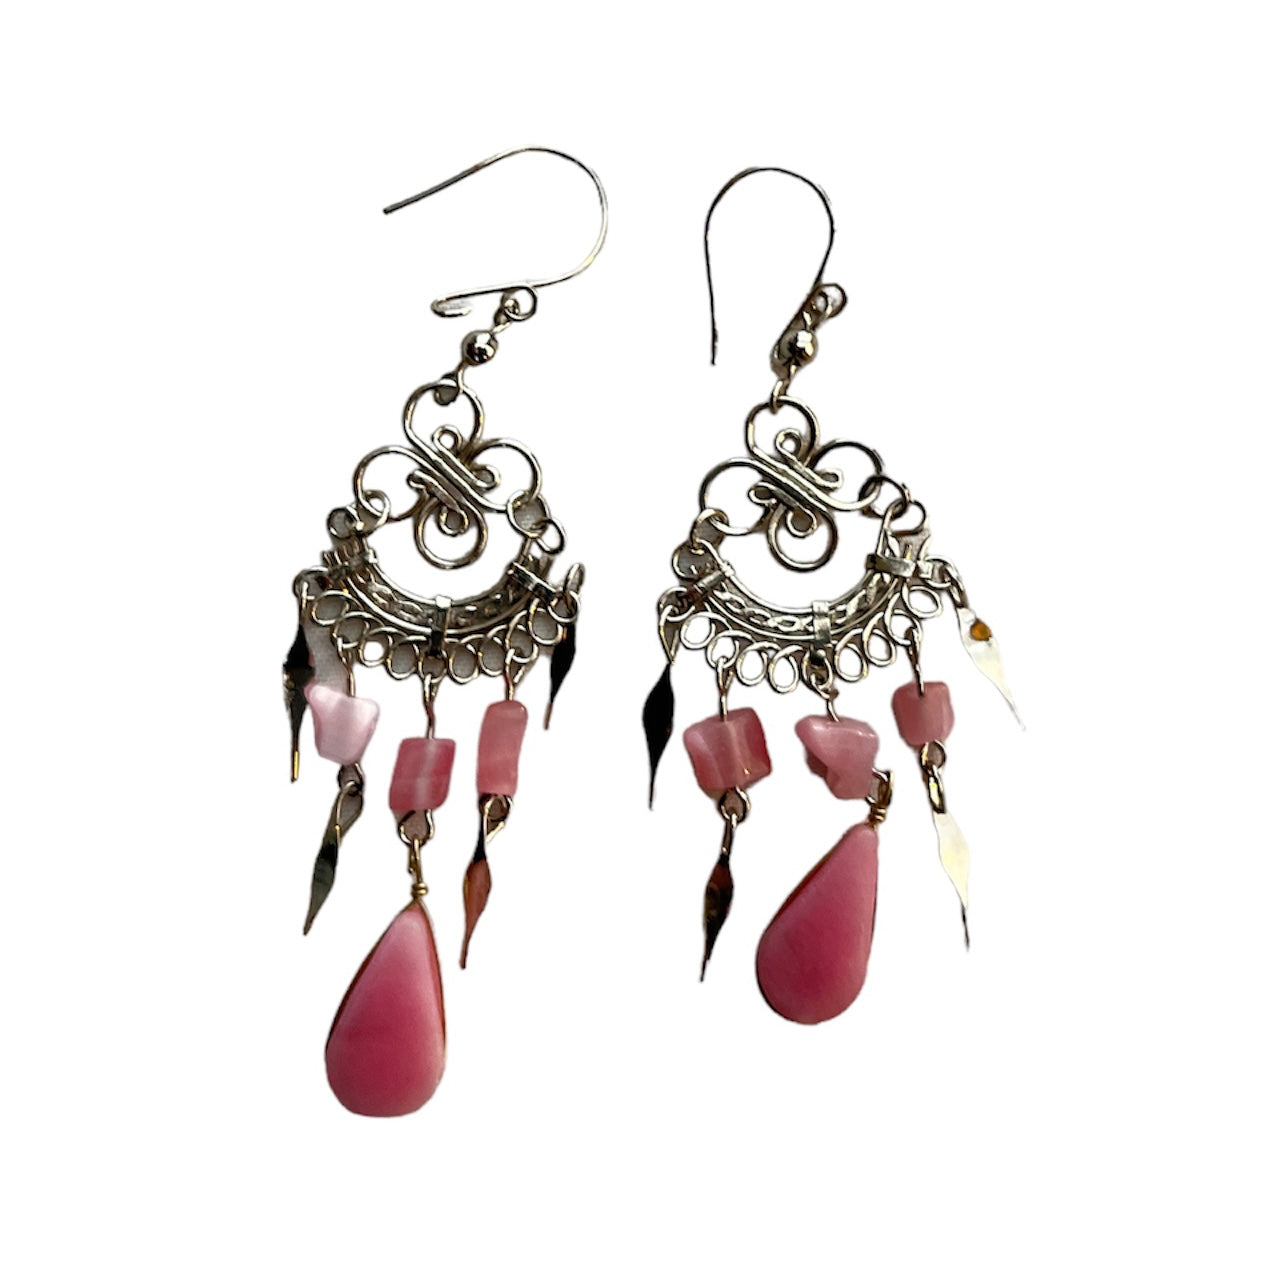 Dangly Silver Wire and Pink Quartz Earrings - Made by Peruvian Amazon Artisan